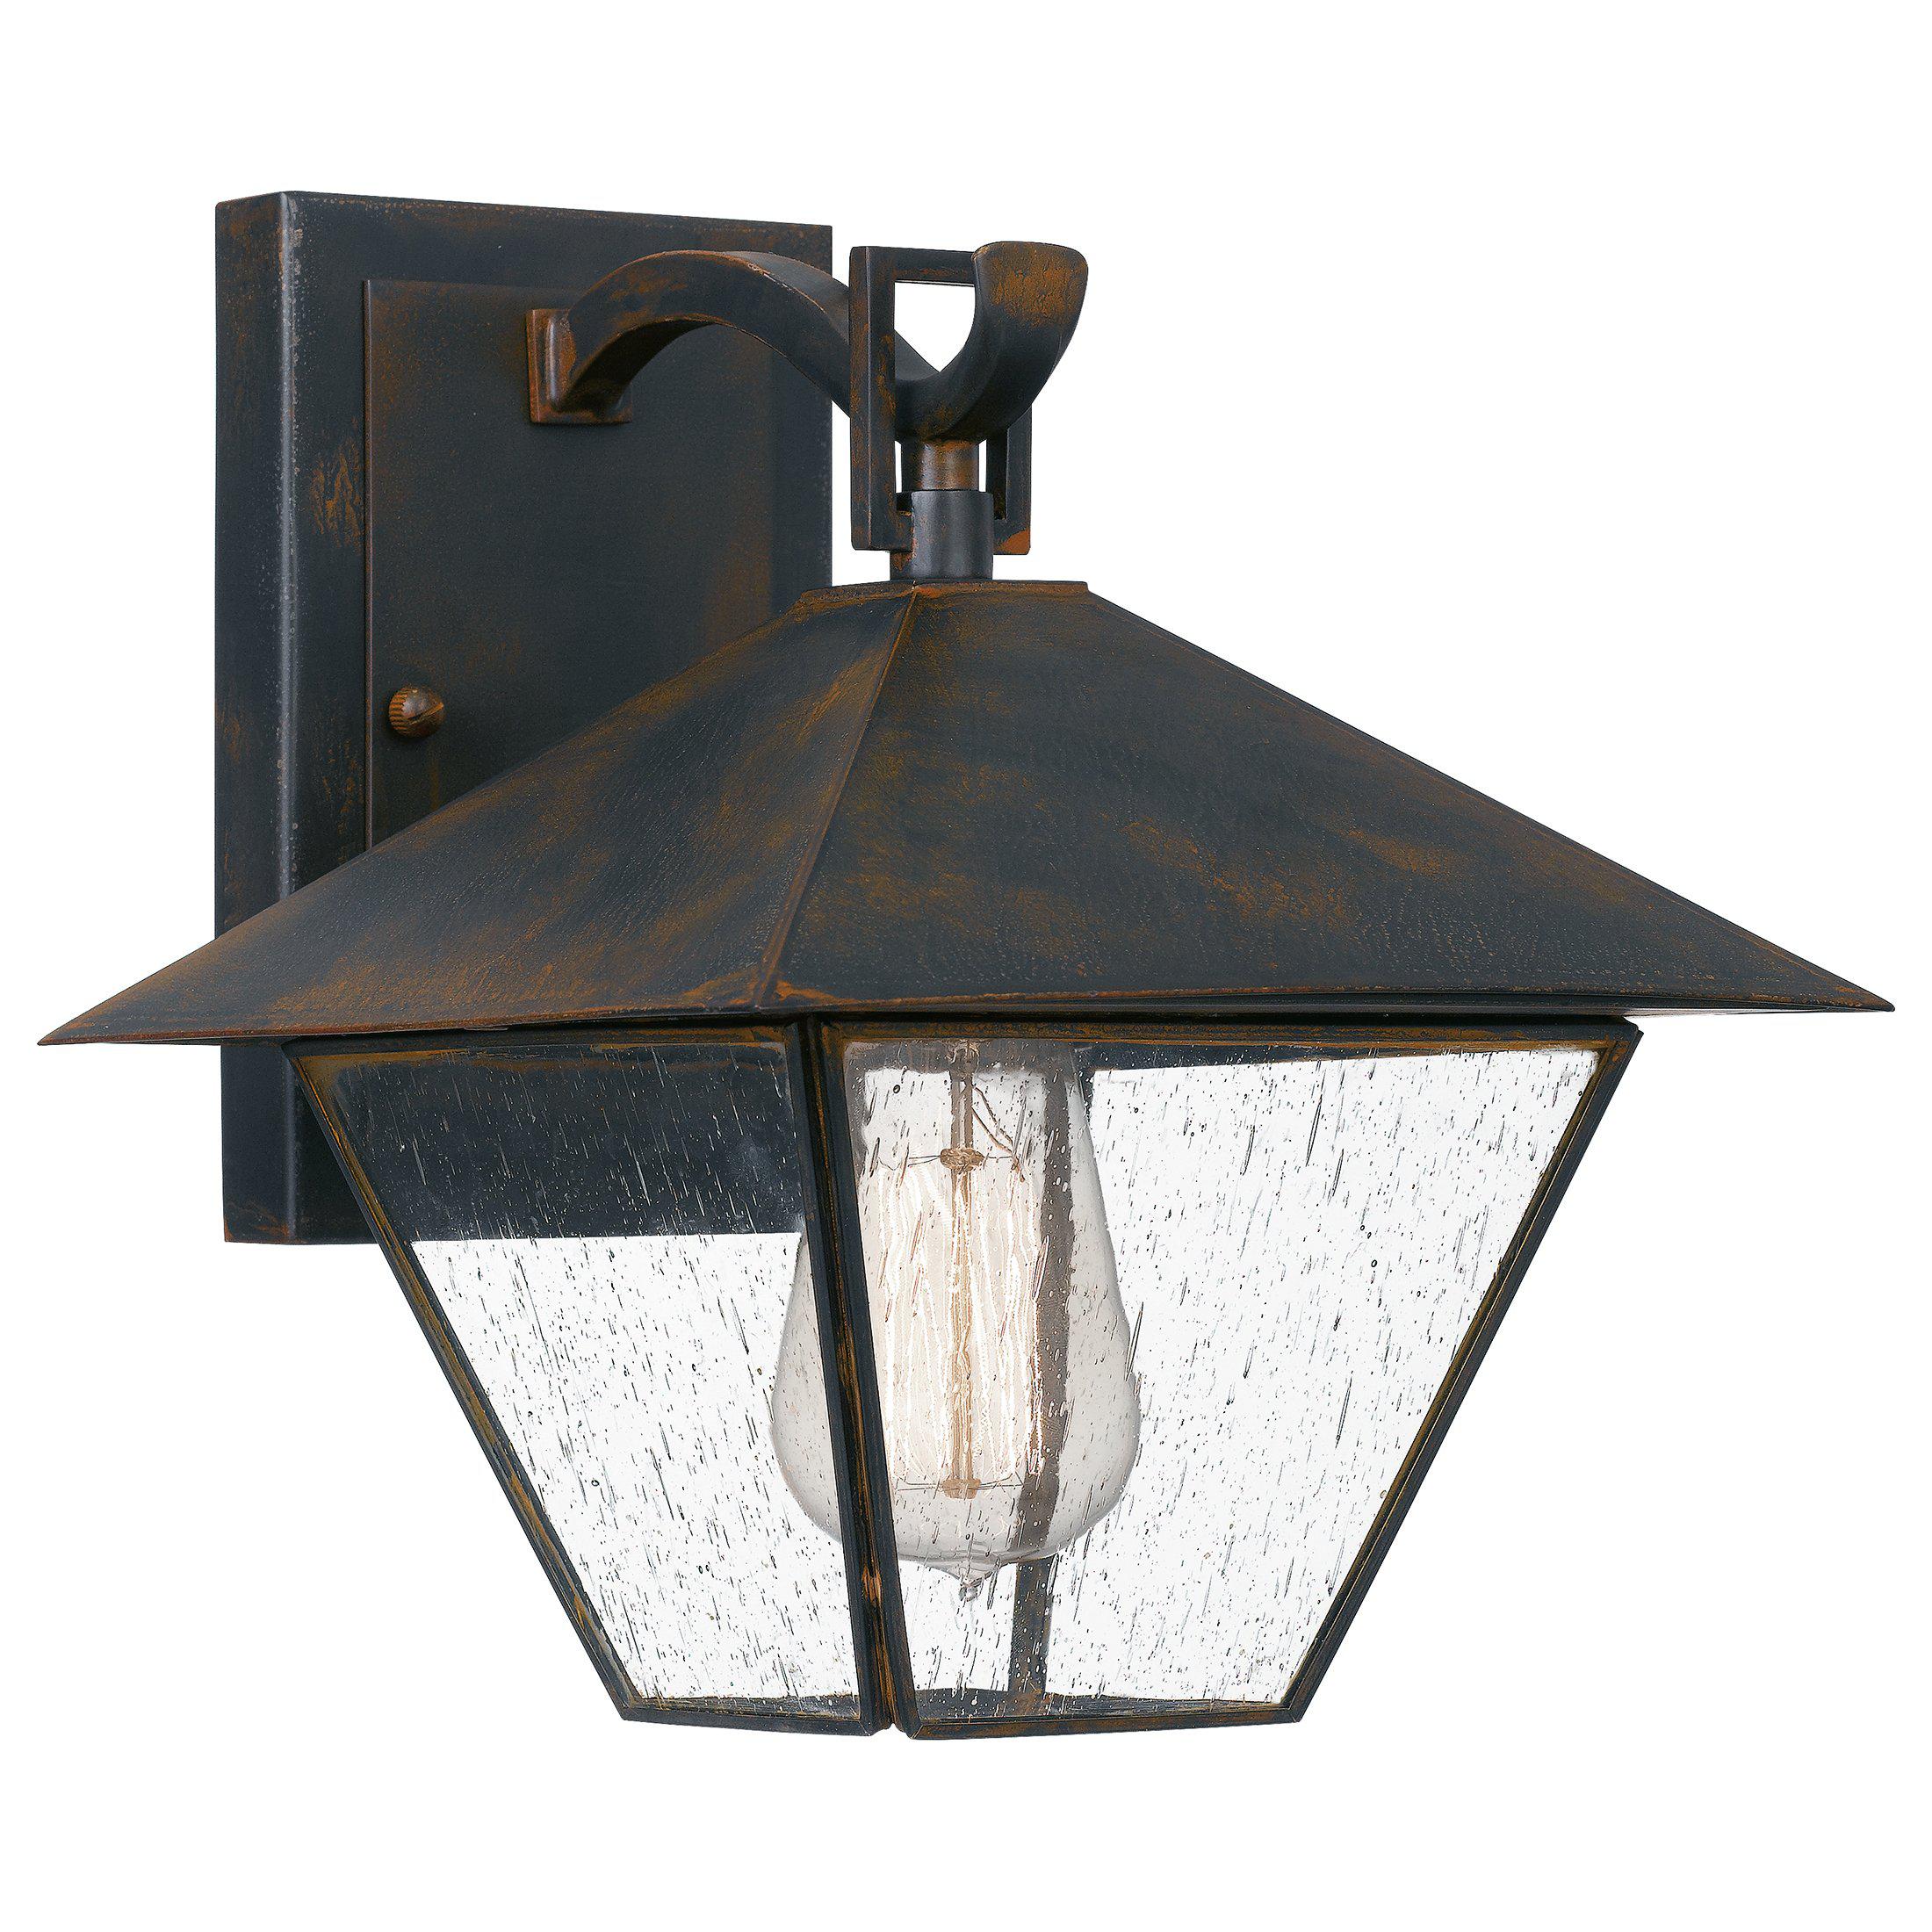 Quoizel  Corporal Outdoor Lantern, Small Outdoor l Wall Quoizel Industrial Bronze  